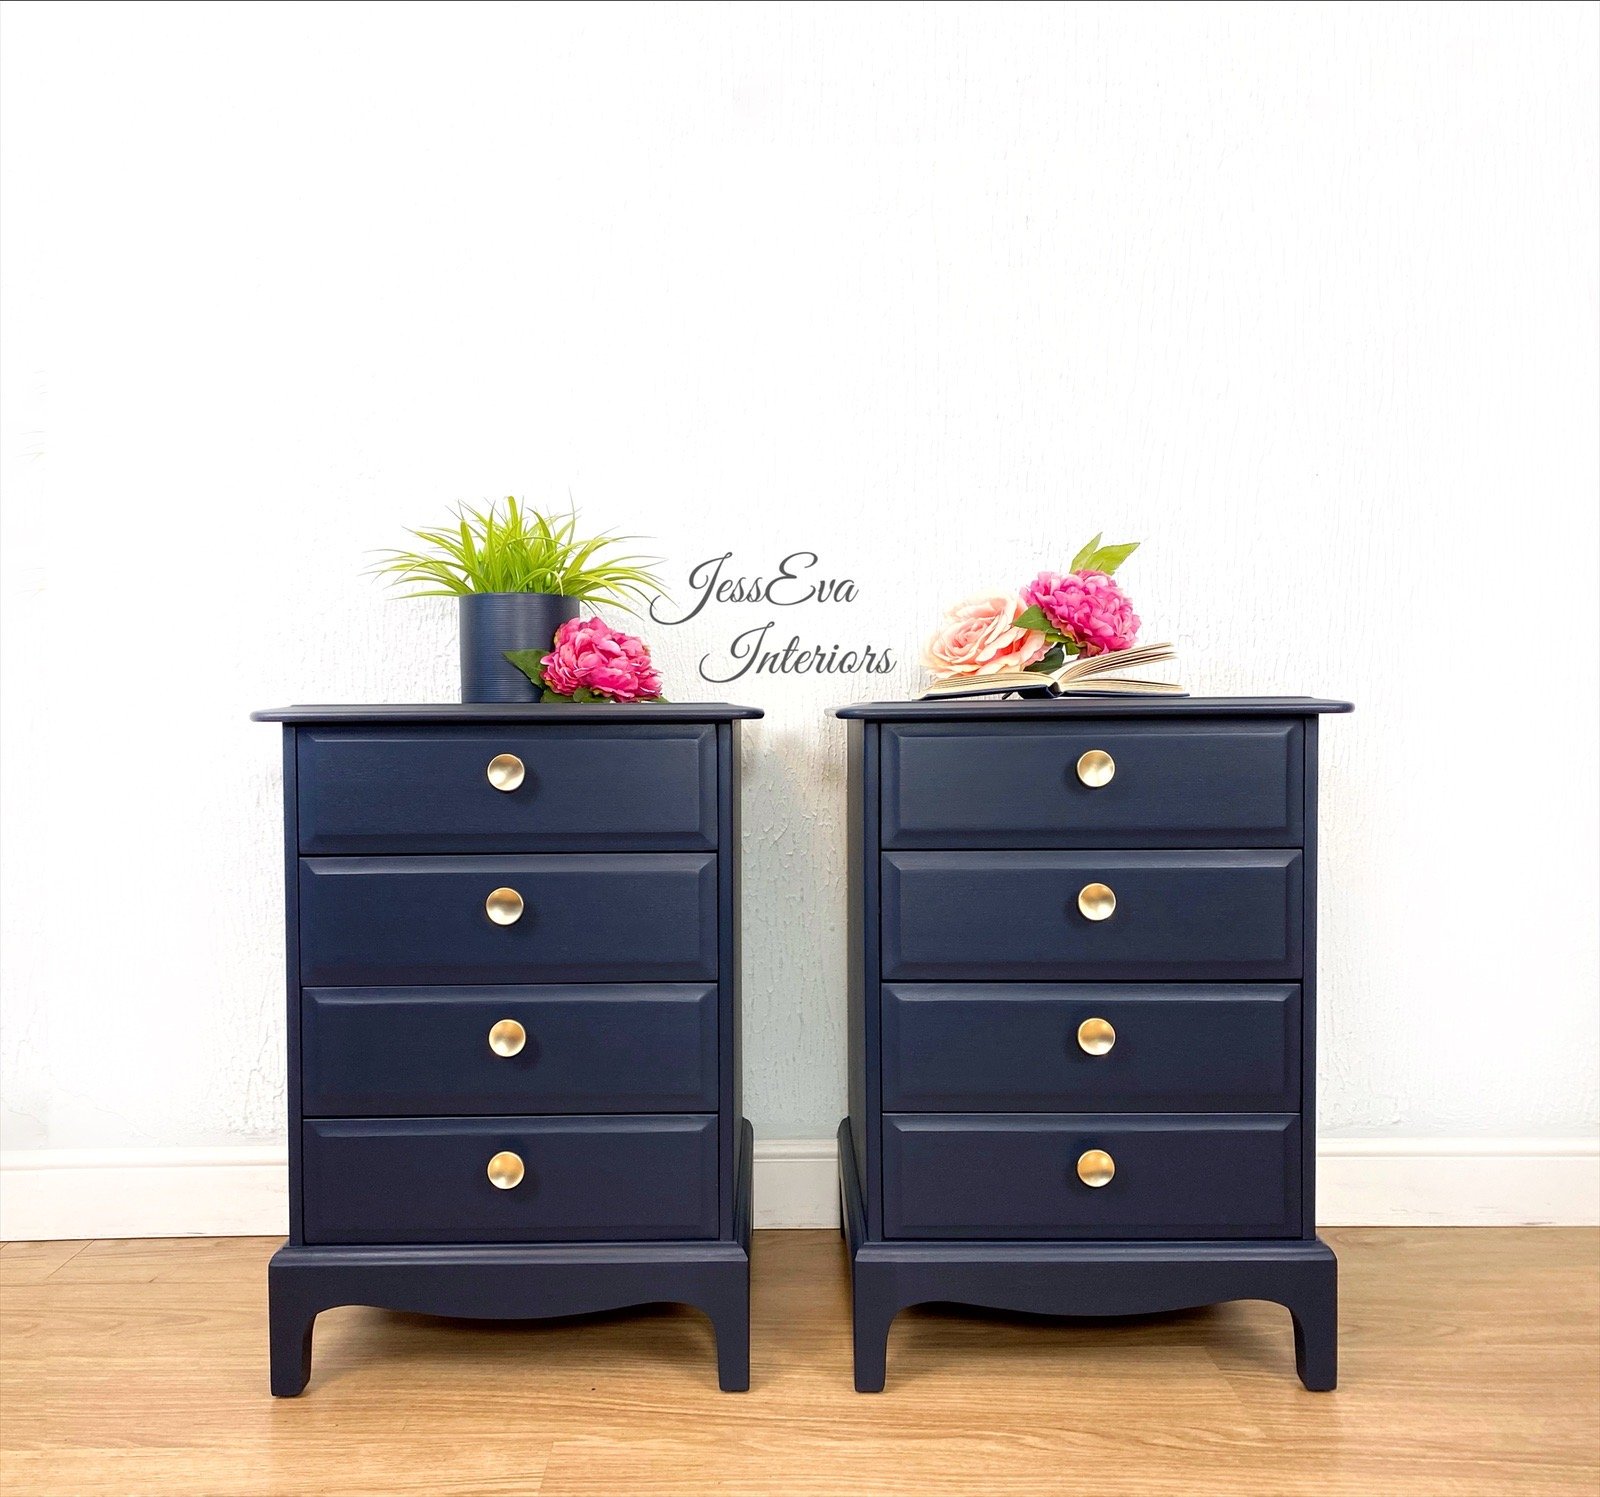 Stag Minstrel Chest of Drawers / Large Bedside Cabinet painted in